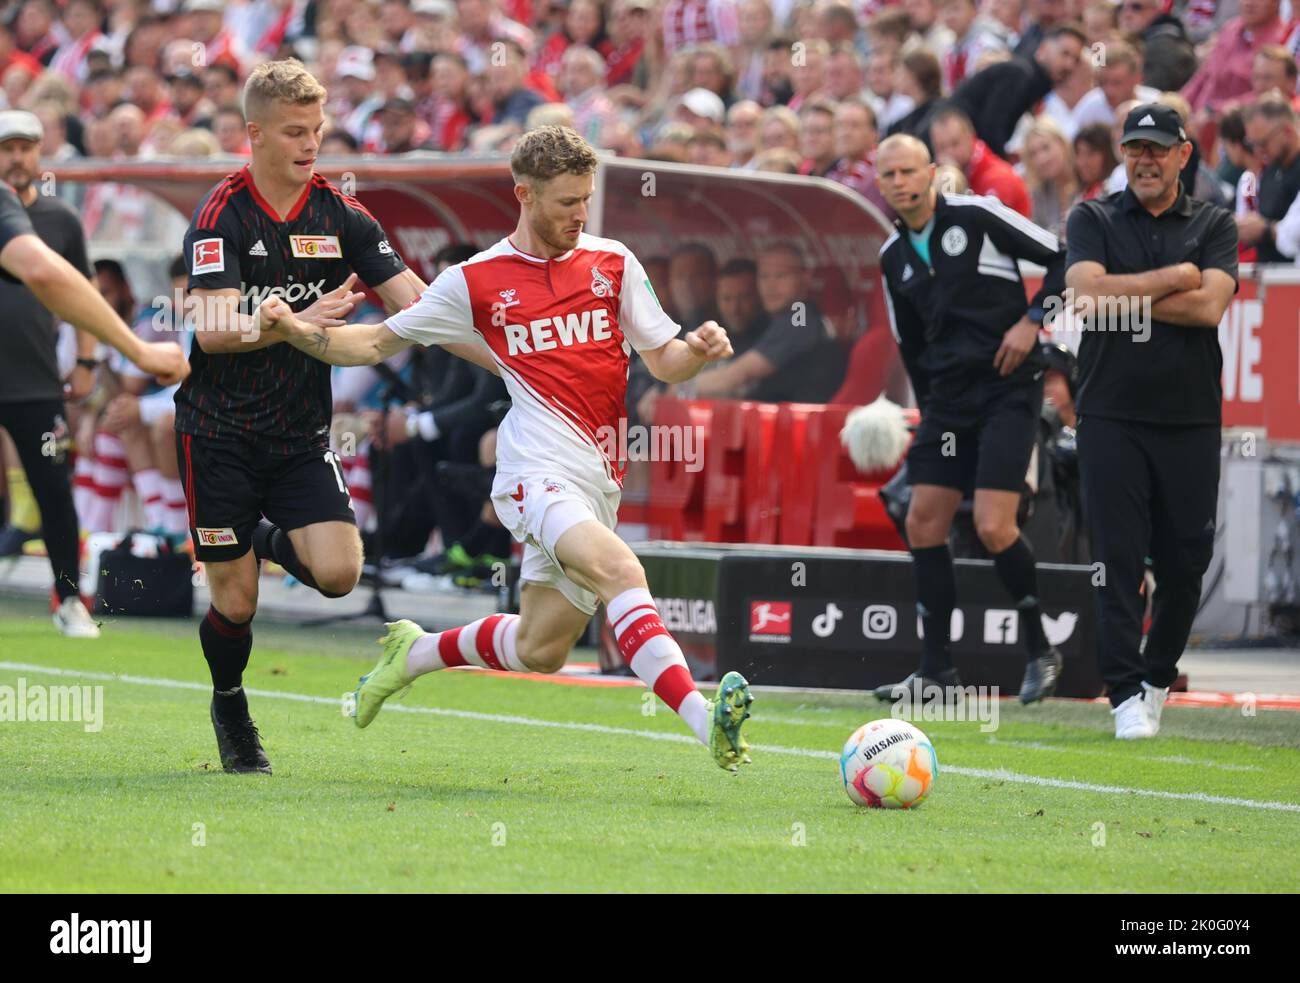 Cologne, Germany. 11th Sep, 2022. Bundesliga, matchday 6, 1. FC Cologne - 1. FC Union Berlin, Andras Schaefer (Union), Florian Kainz (Koeln) battle for the ball. Credit: Juergen Schwarz/Alamy Live News Stock Photo